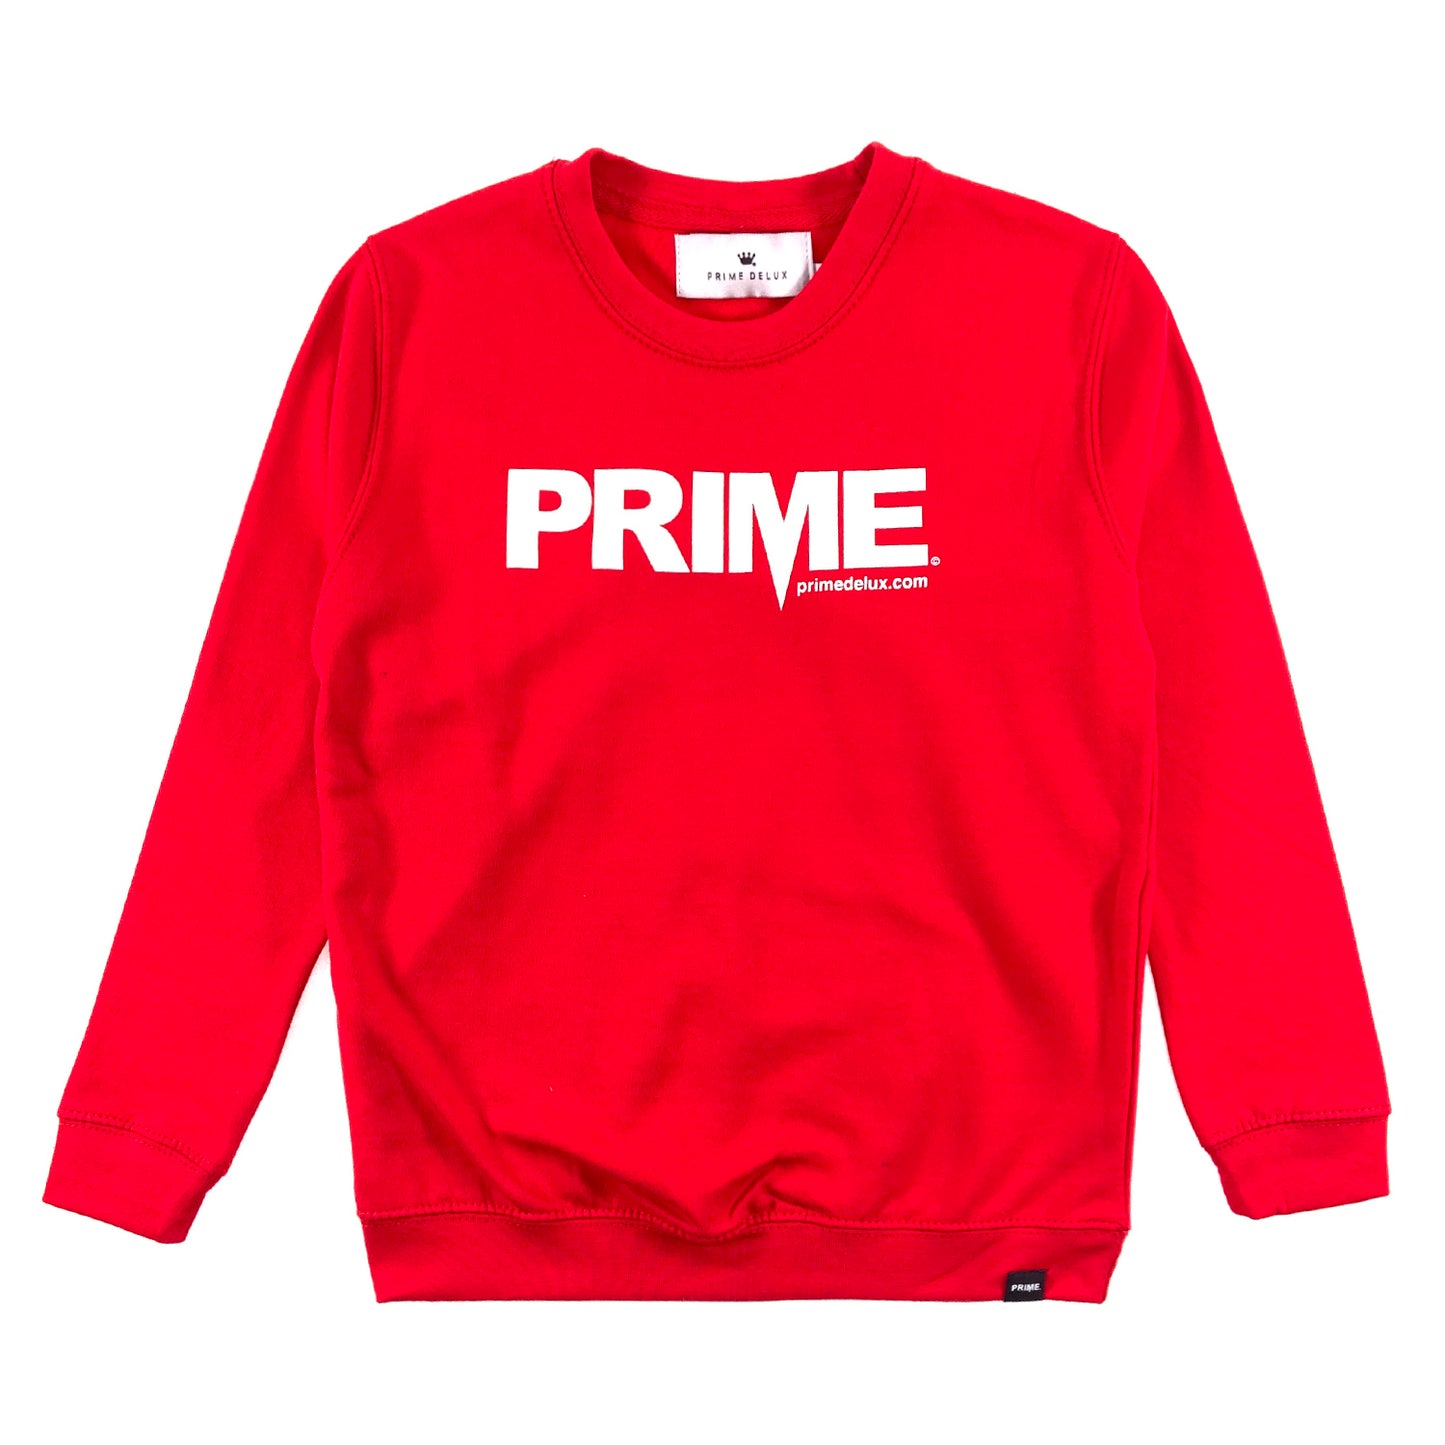 PRIME DELUX YOUTHS OG PREMIUM CREW SWEAT - FIRE RED / WHITE - Prime Delux Store